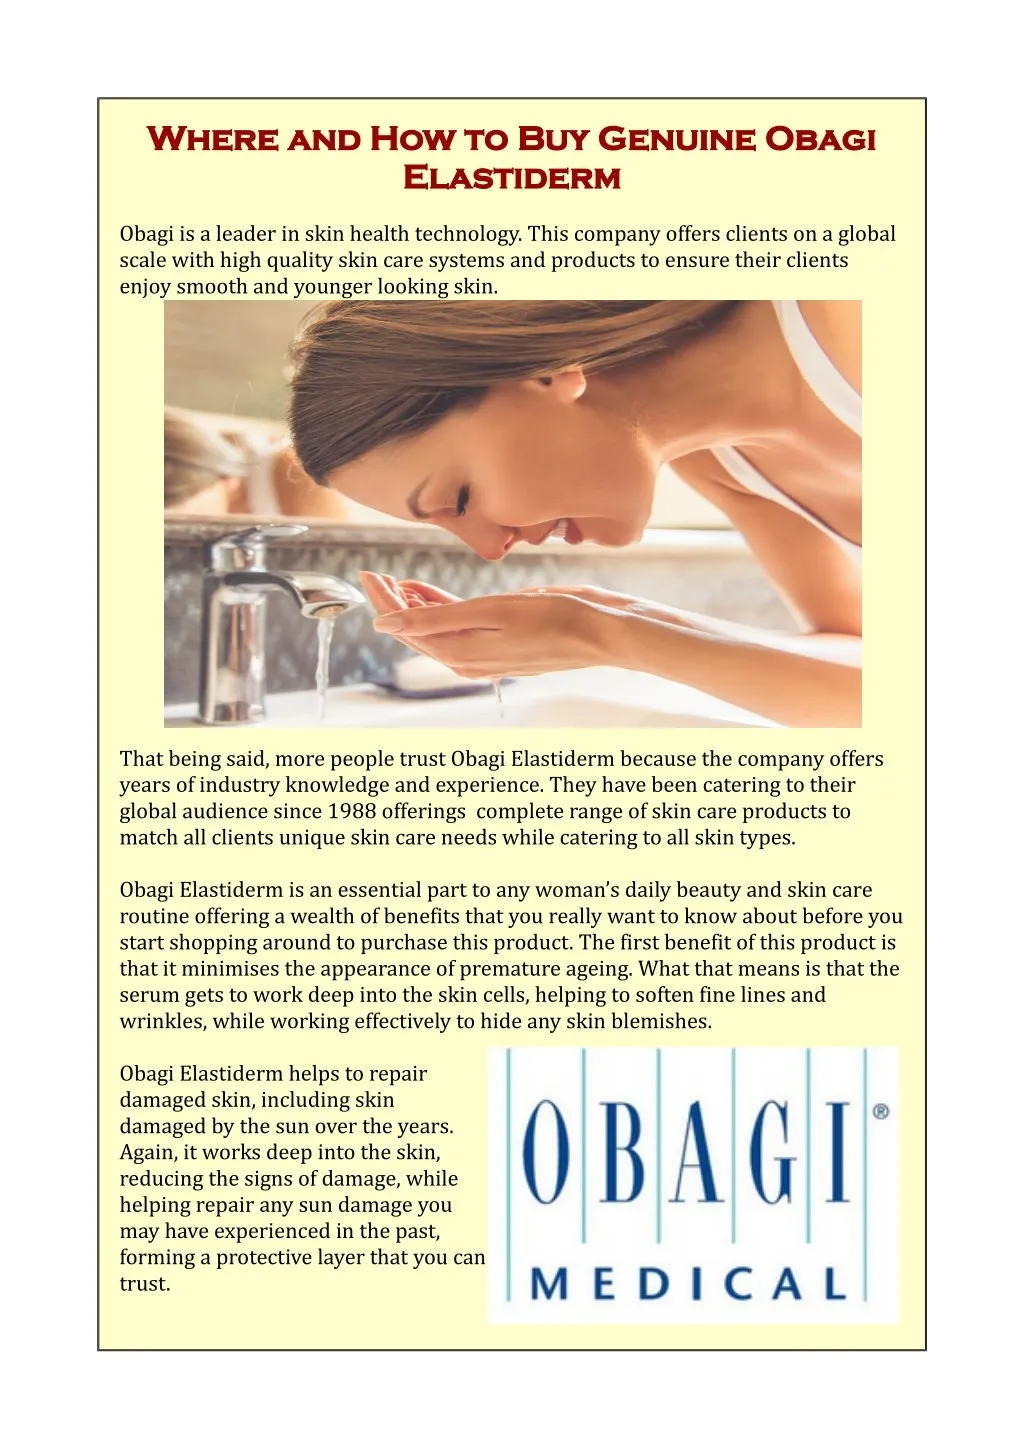 where and how to buy genuine obagi where